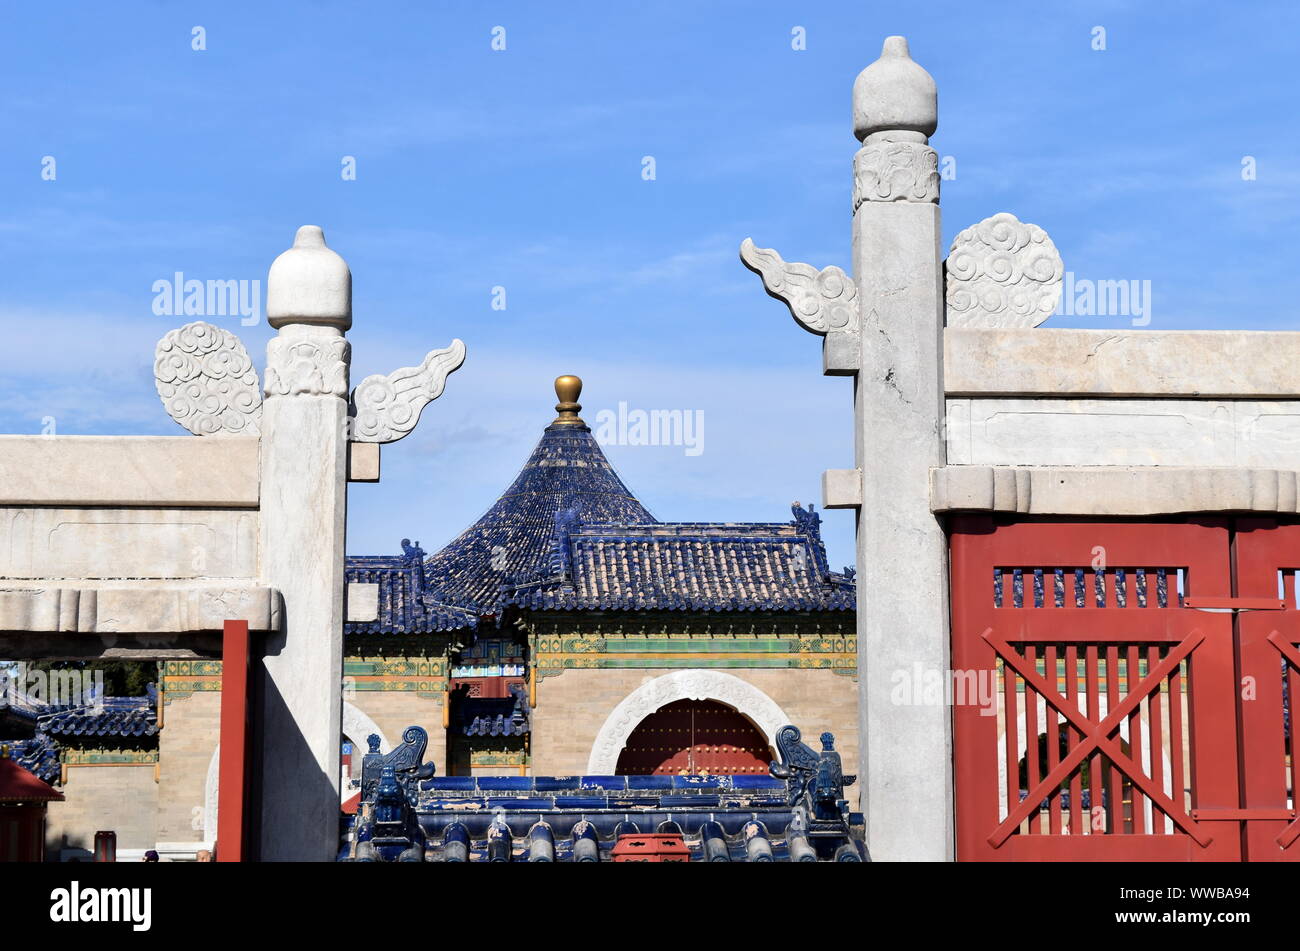 Beijing Temple of Heaven traditional Chinese architecture and ceremonial gates - China Stock Photo